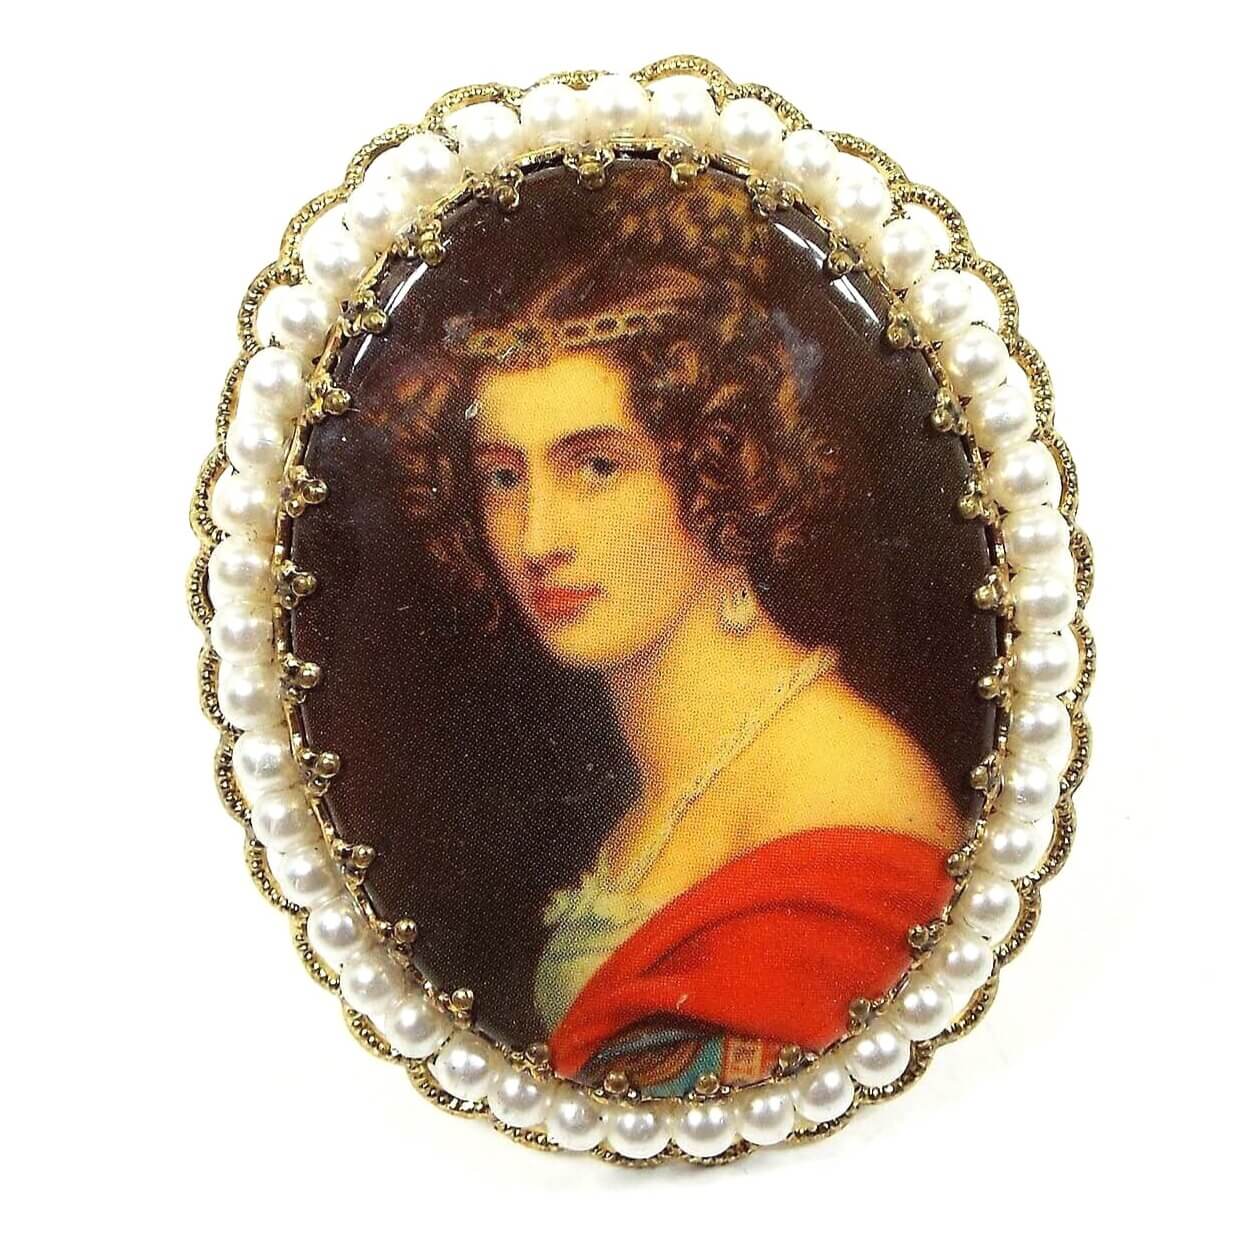 Front view of the Mid Century vintage cameo brooch pin made in West Germany. It is oval in shape with a filigree edge and small round white plastic faux pearls. The metal is gold tone in color. There is a decal over a plastic cab on the front depicting a woman with curly brown hair with a white dress and red shawl. The background is dark brown. 